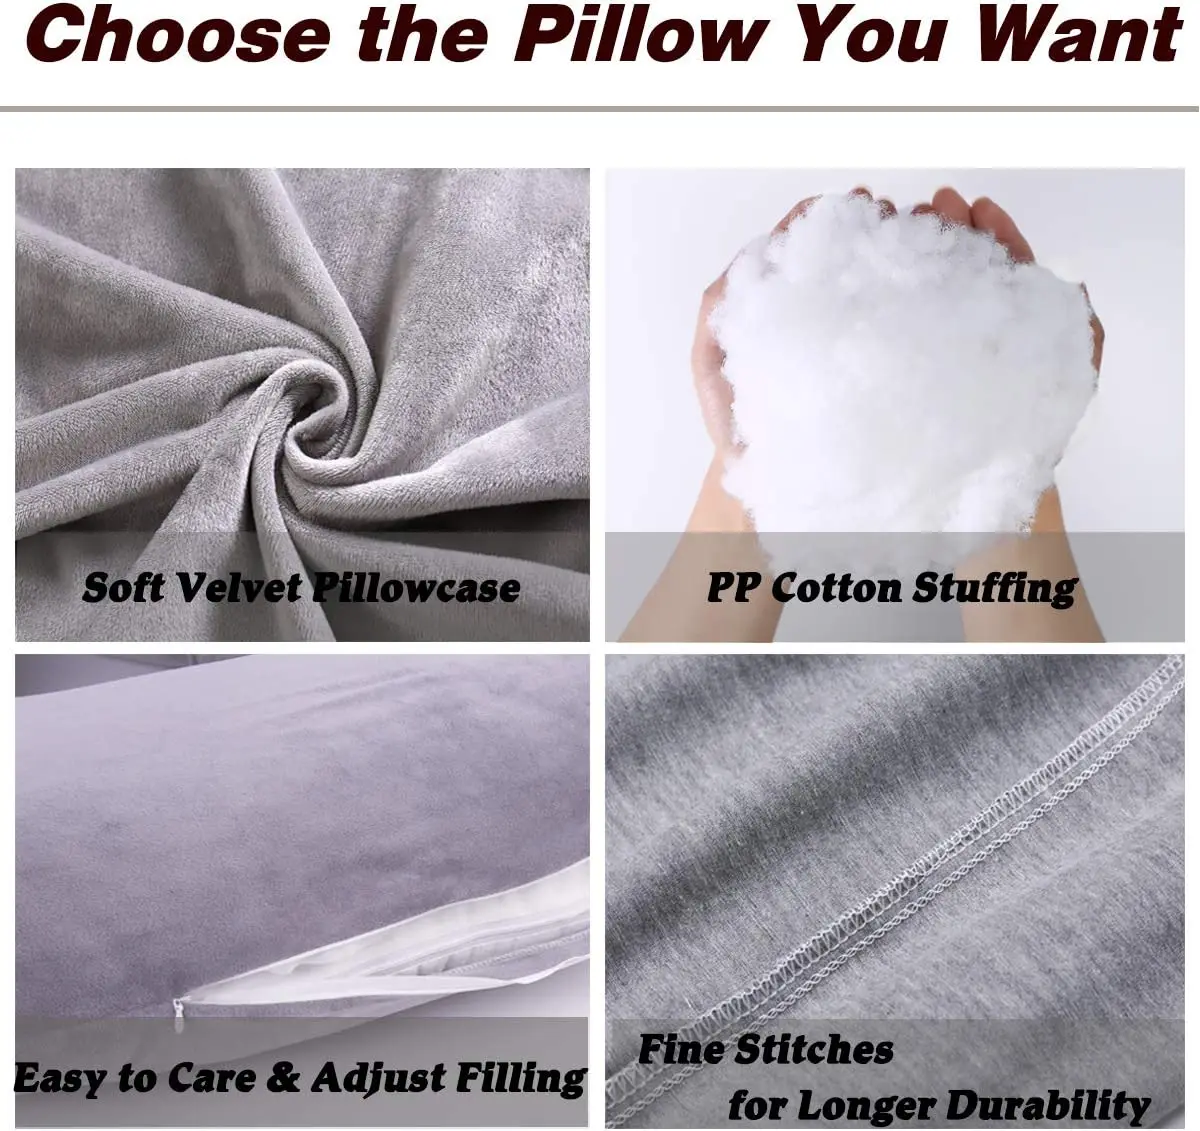 Pregnancy Pillows Full Body Maternity Pillow For Sleeping With Cooling ...